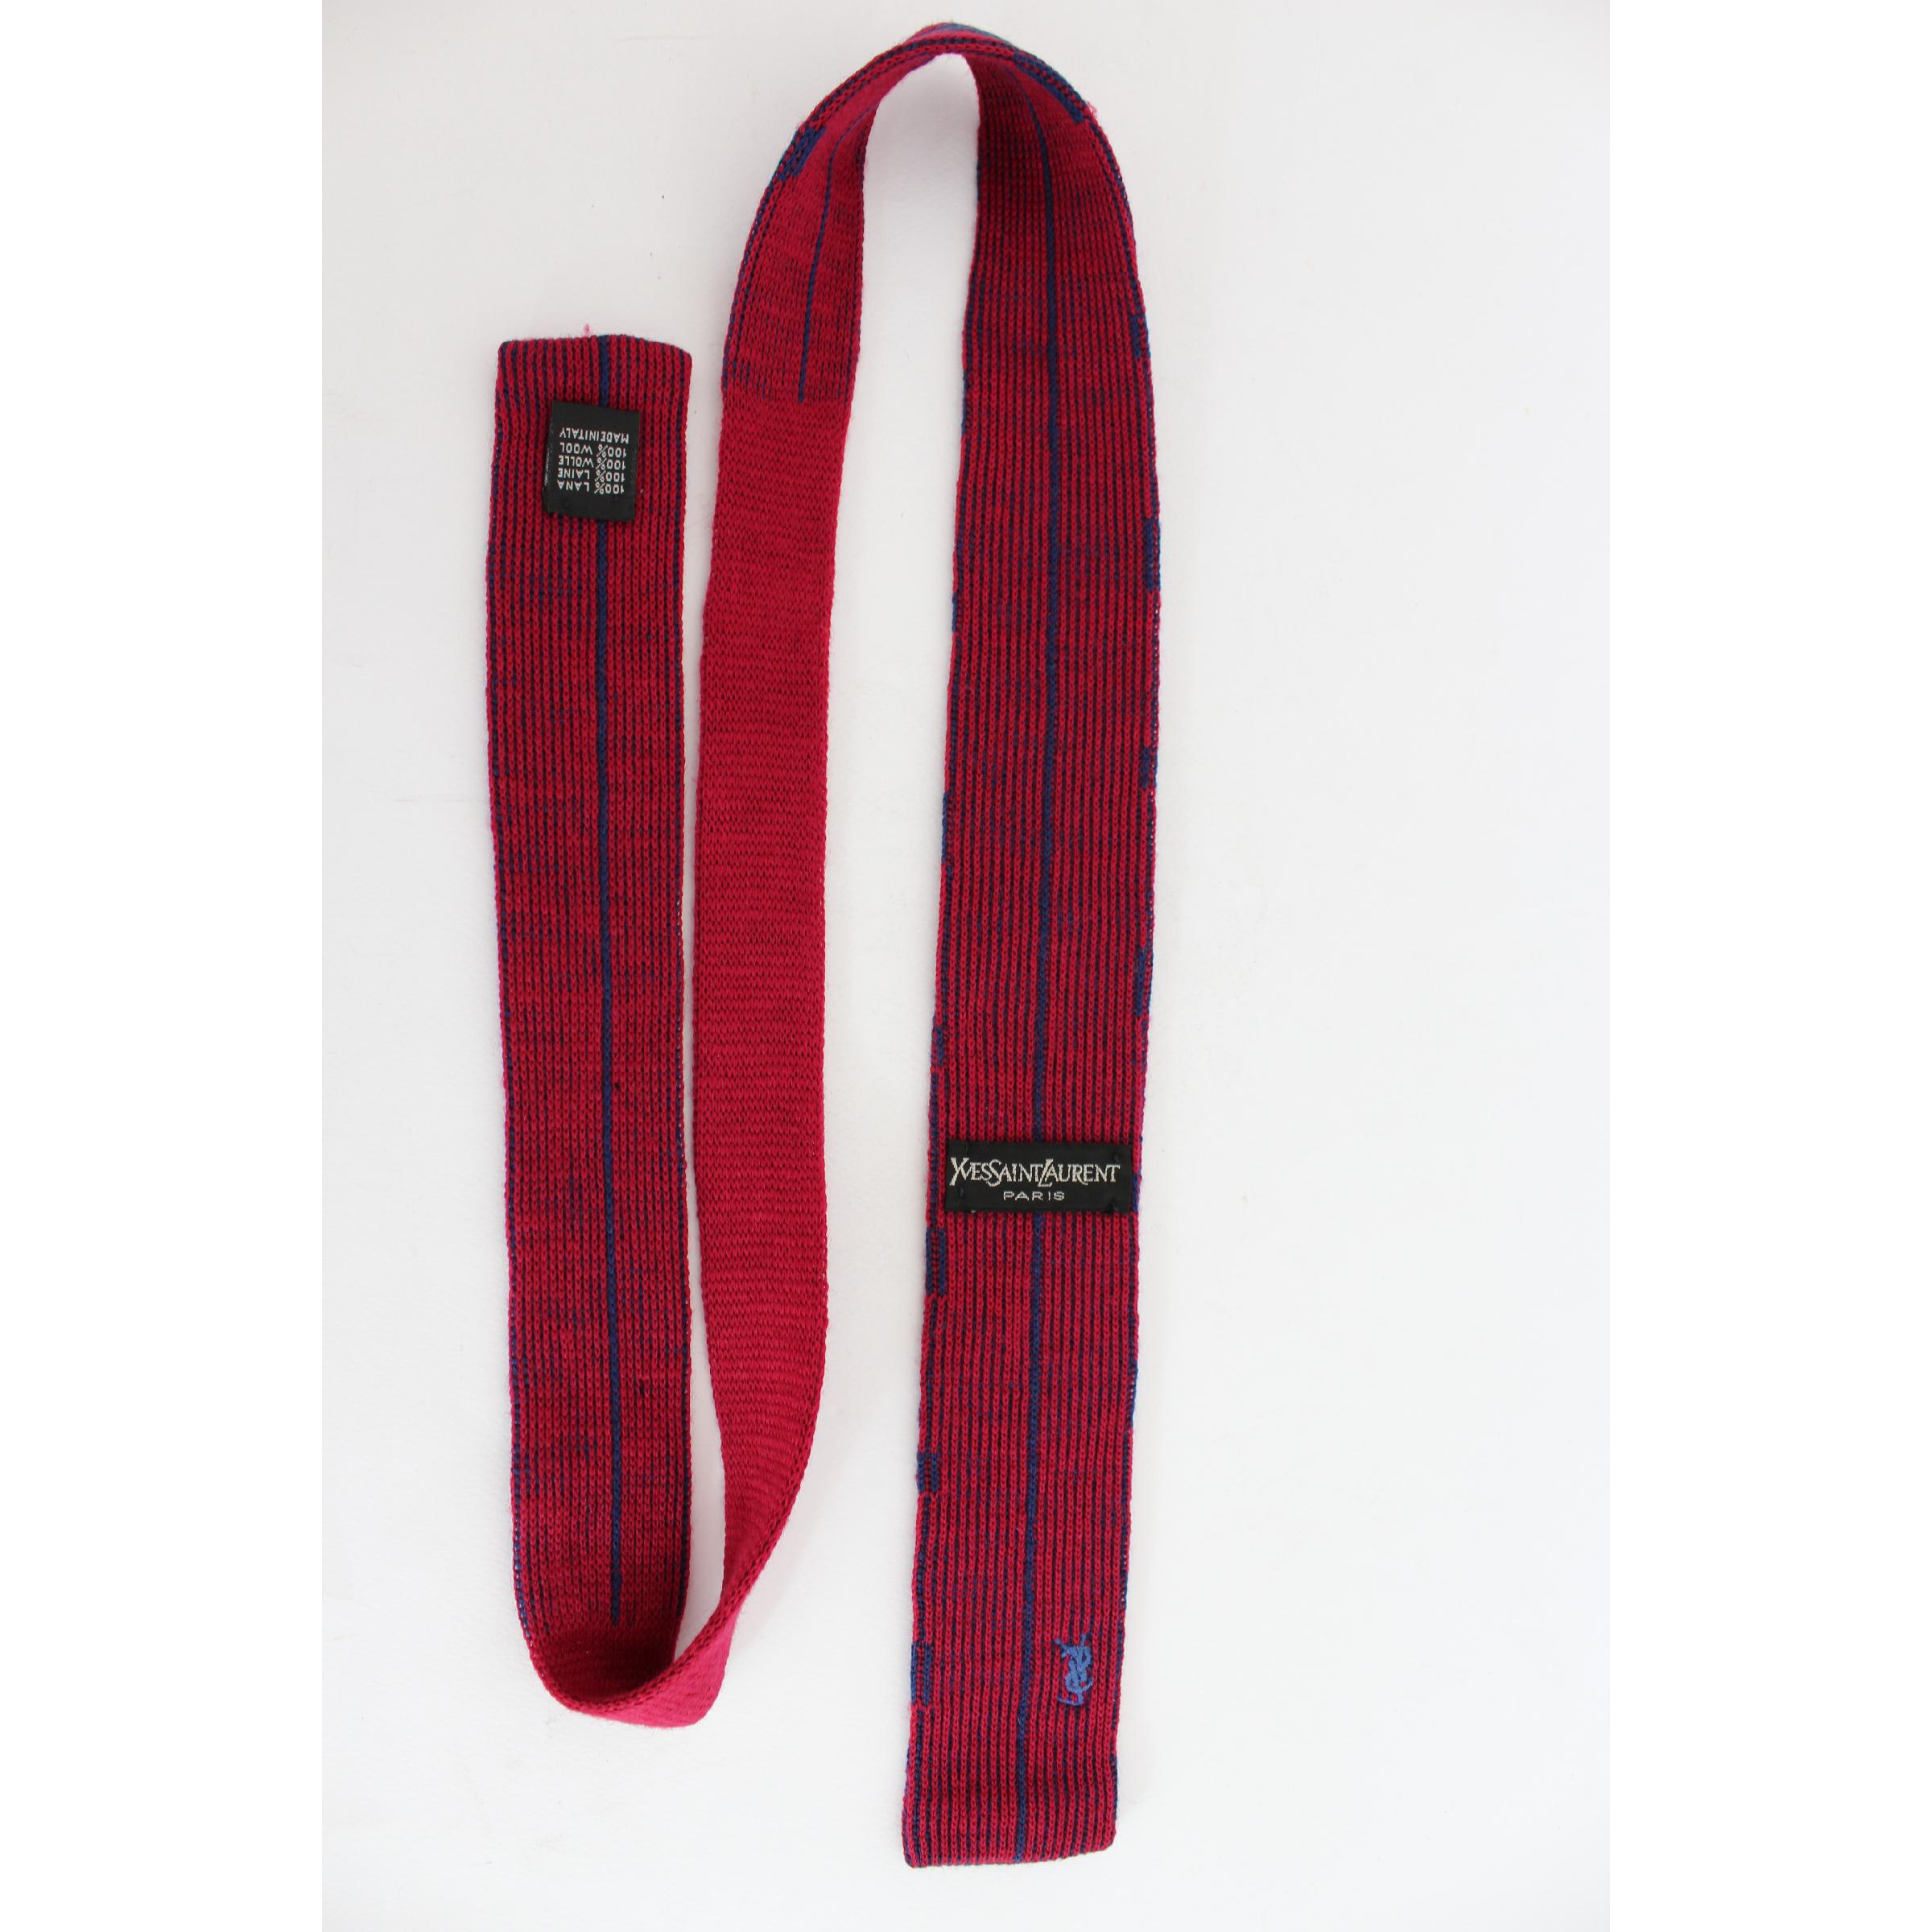 Yves Saint Laurent vintage tie, red and blue striped 100% wool. Excellent vintage conditions.

Length: 127 cm
Width: 5.5 cm